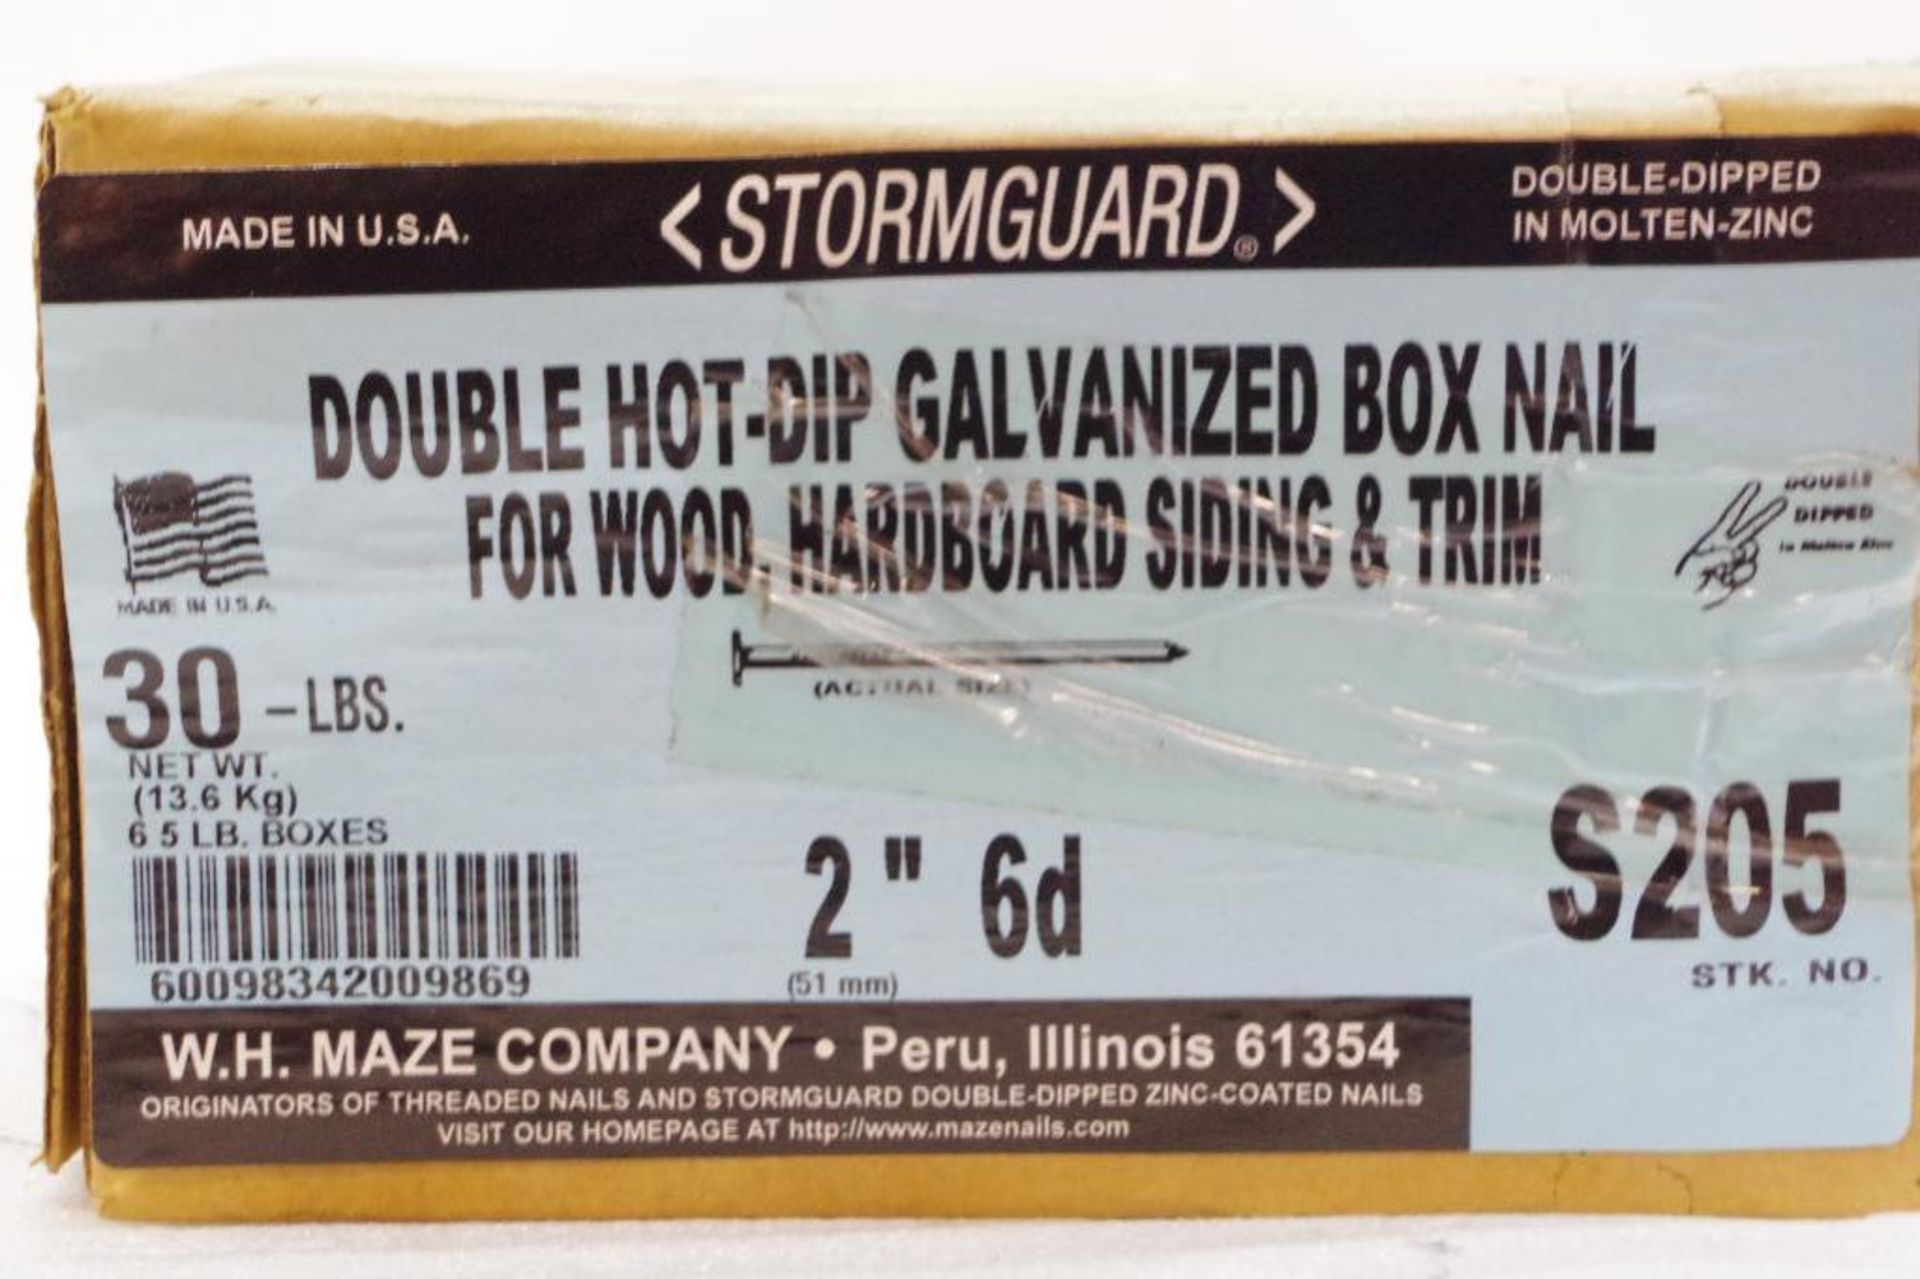 (30) Lbs. MAZE Stormguard Hot-Dip Galvanized Box Nail 2" 6d M/N S205, Made in USA (6 Boxes 5 Lbs.) - Image 3 of 7